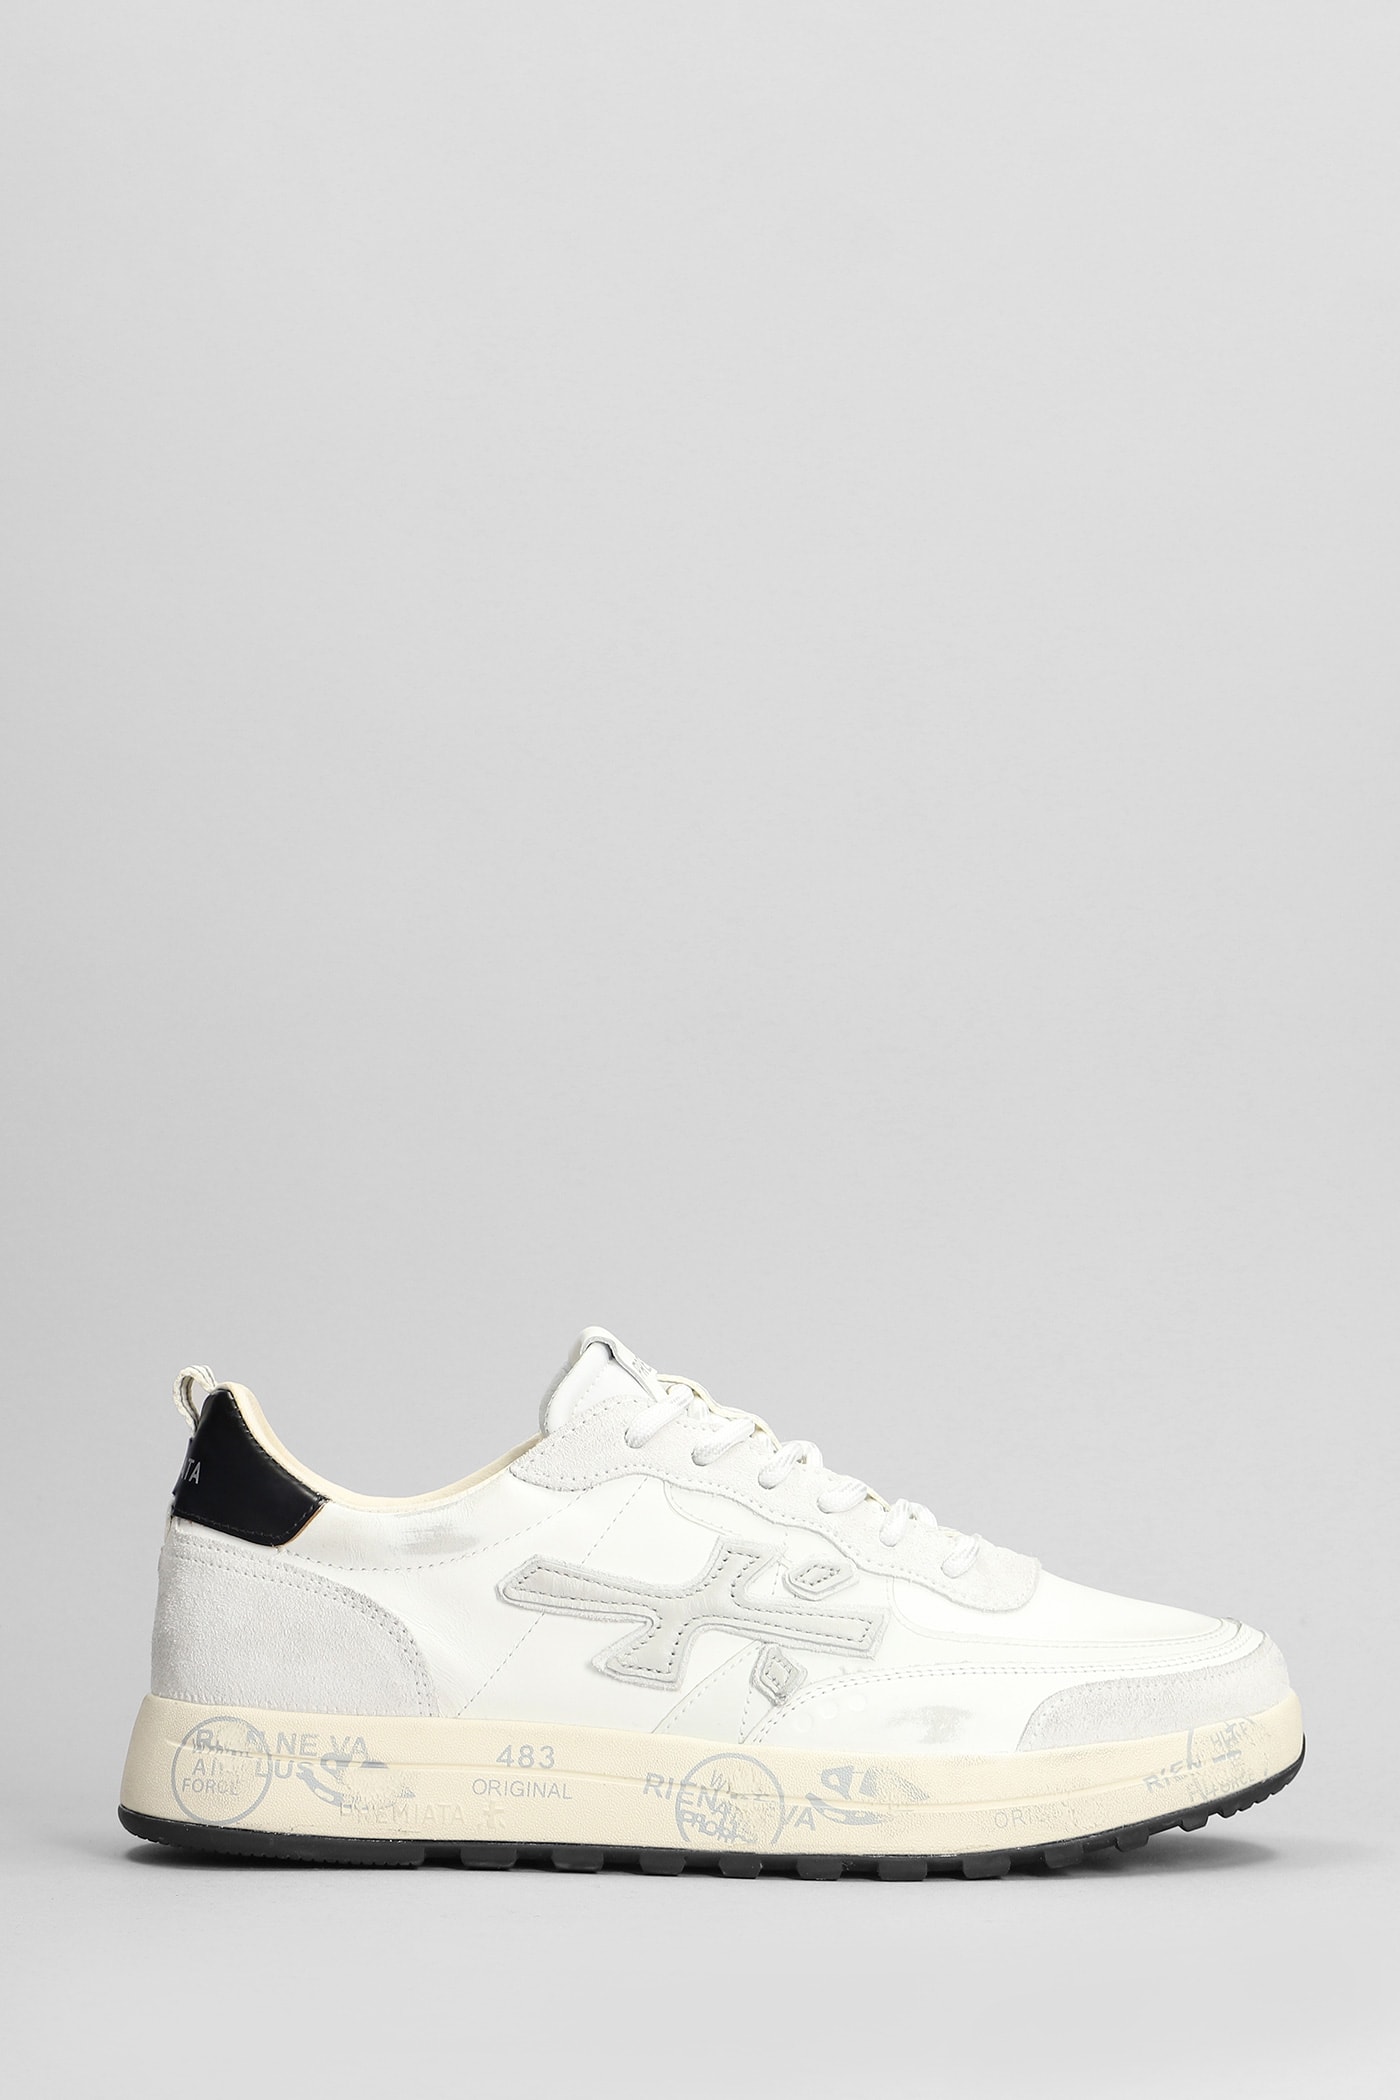 Shop Premiata Nous Sneakers In White Suede And Leather